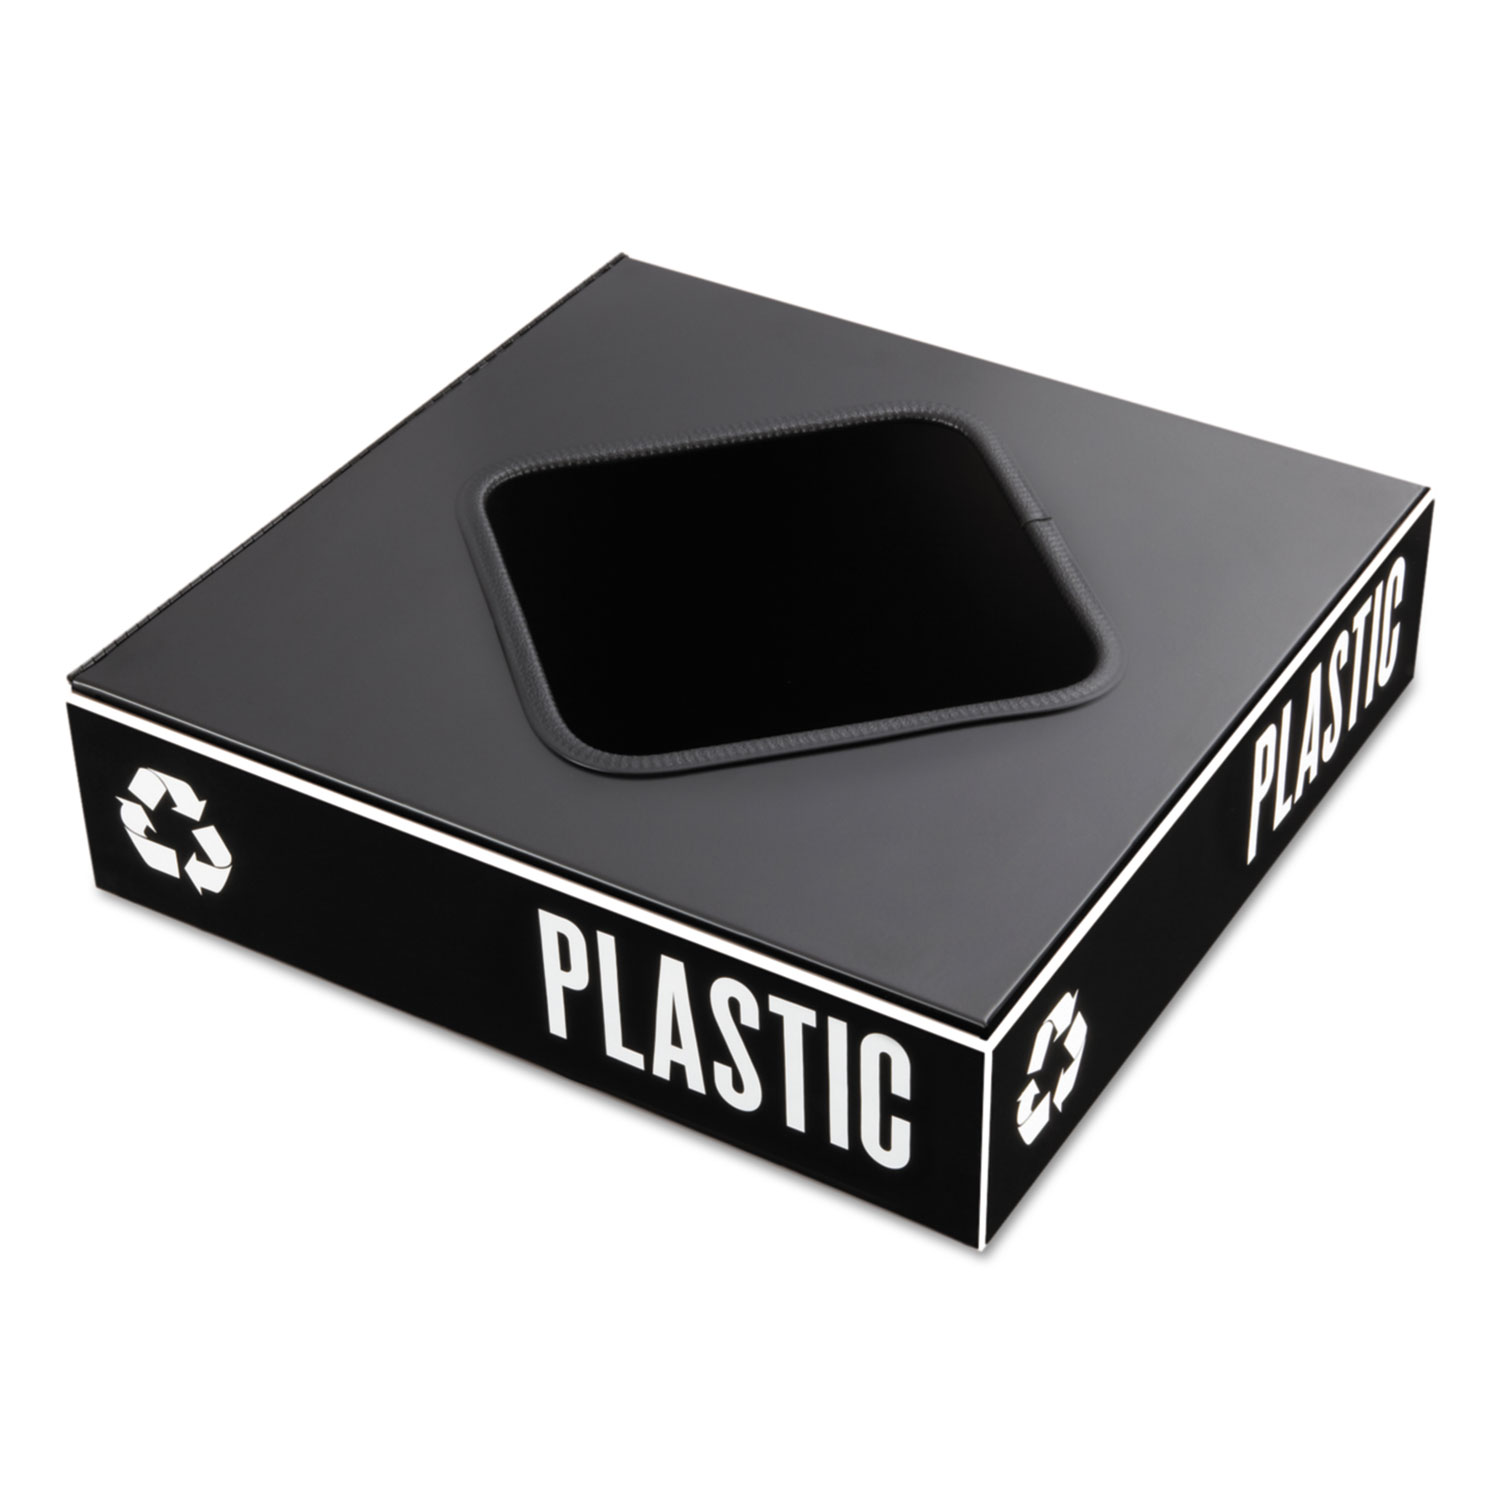  Safco 2989BL Public Square Recycling Container Lid, Square Opening, 15.25 x 15.25 x 2, Black (SAF2989BL) 